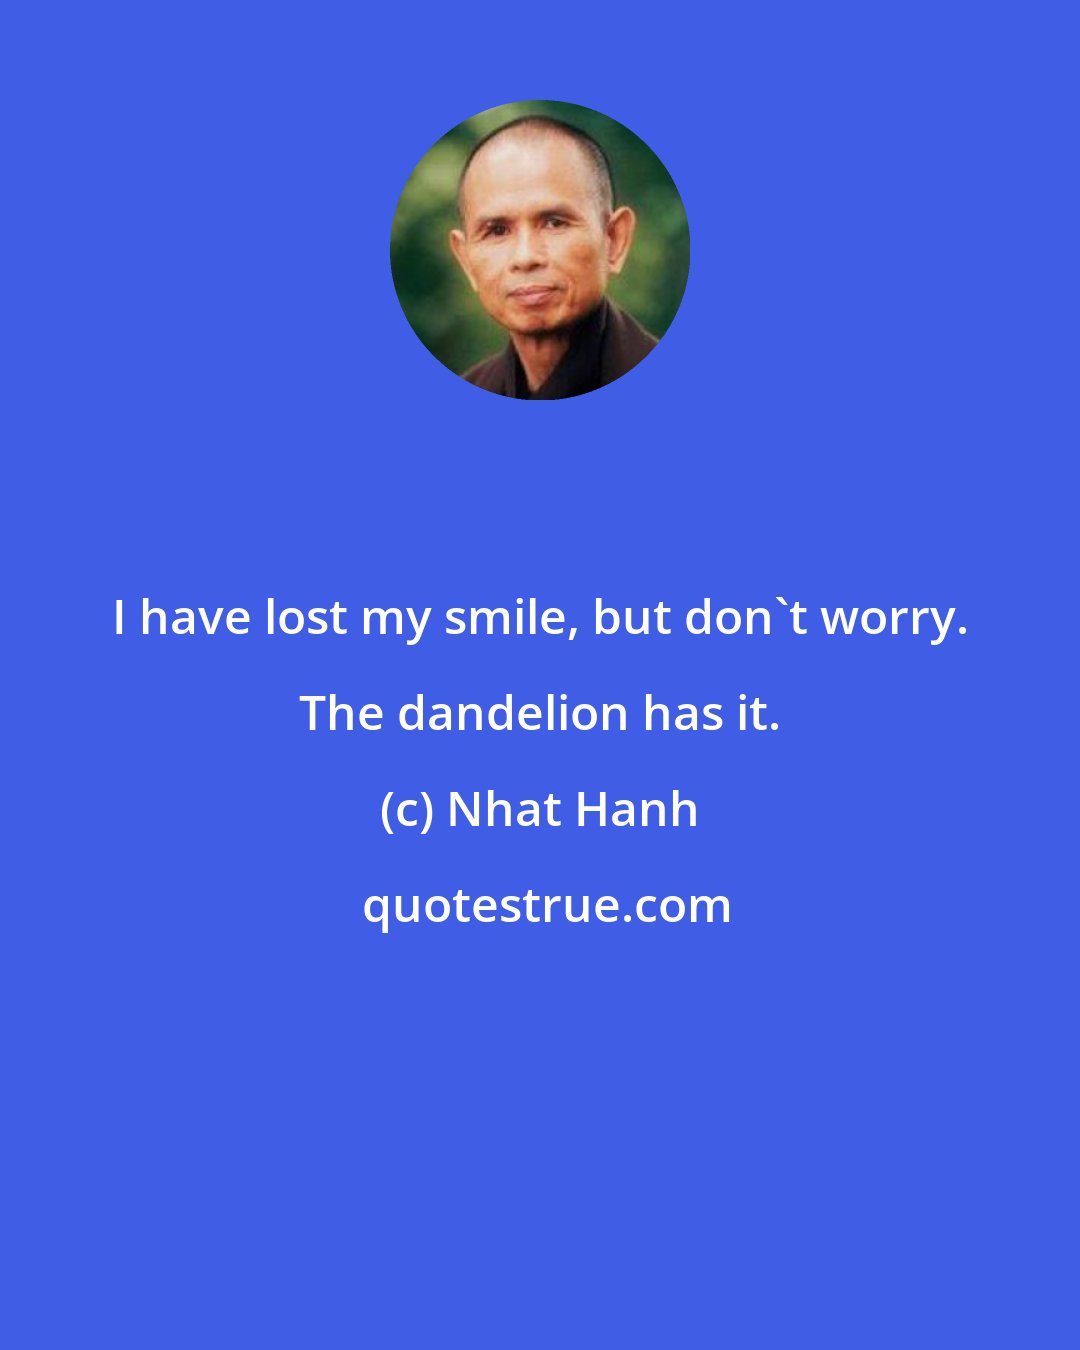 Nhat Hanh: I have lost my smile, but don't worry. The dandelion has it.